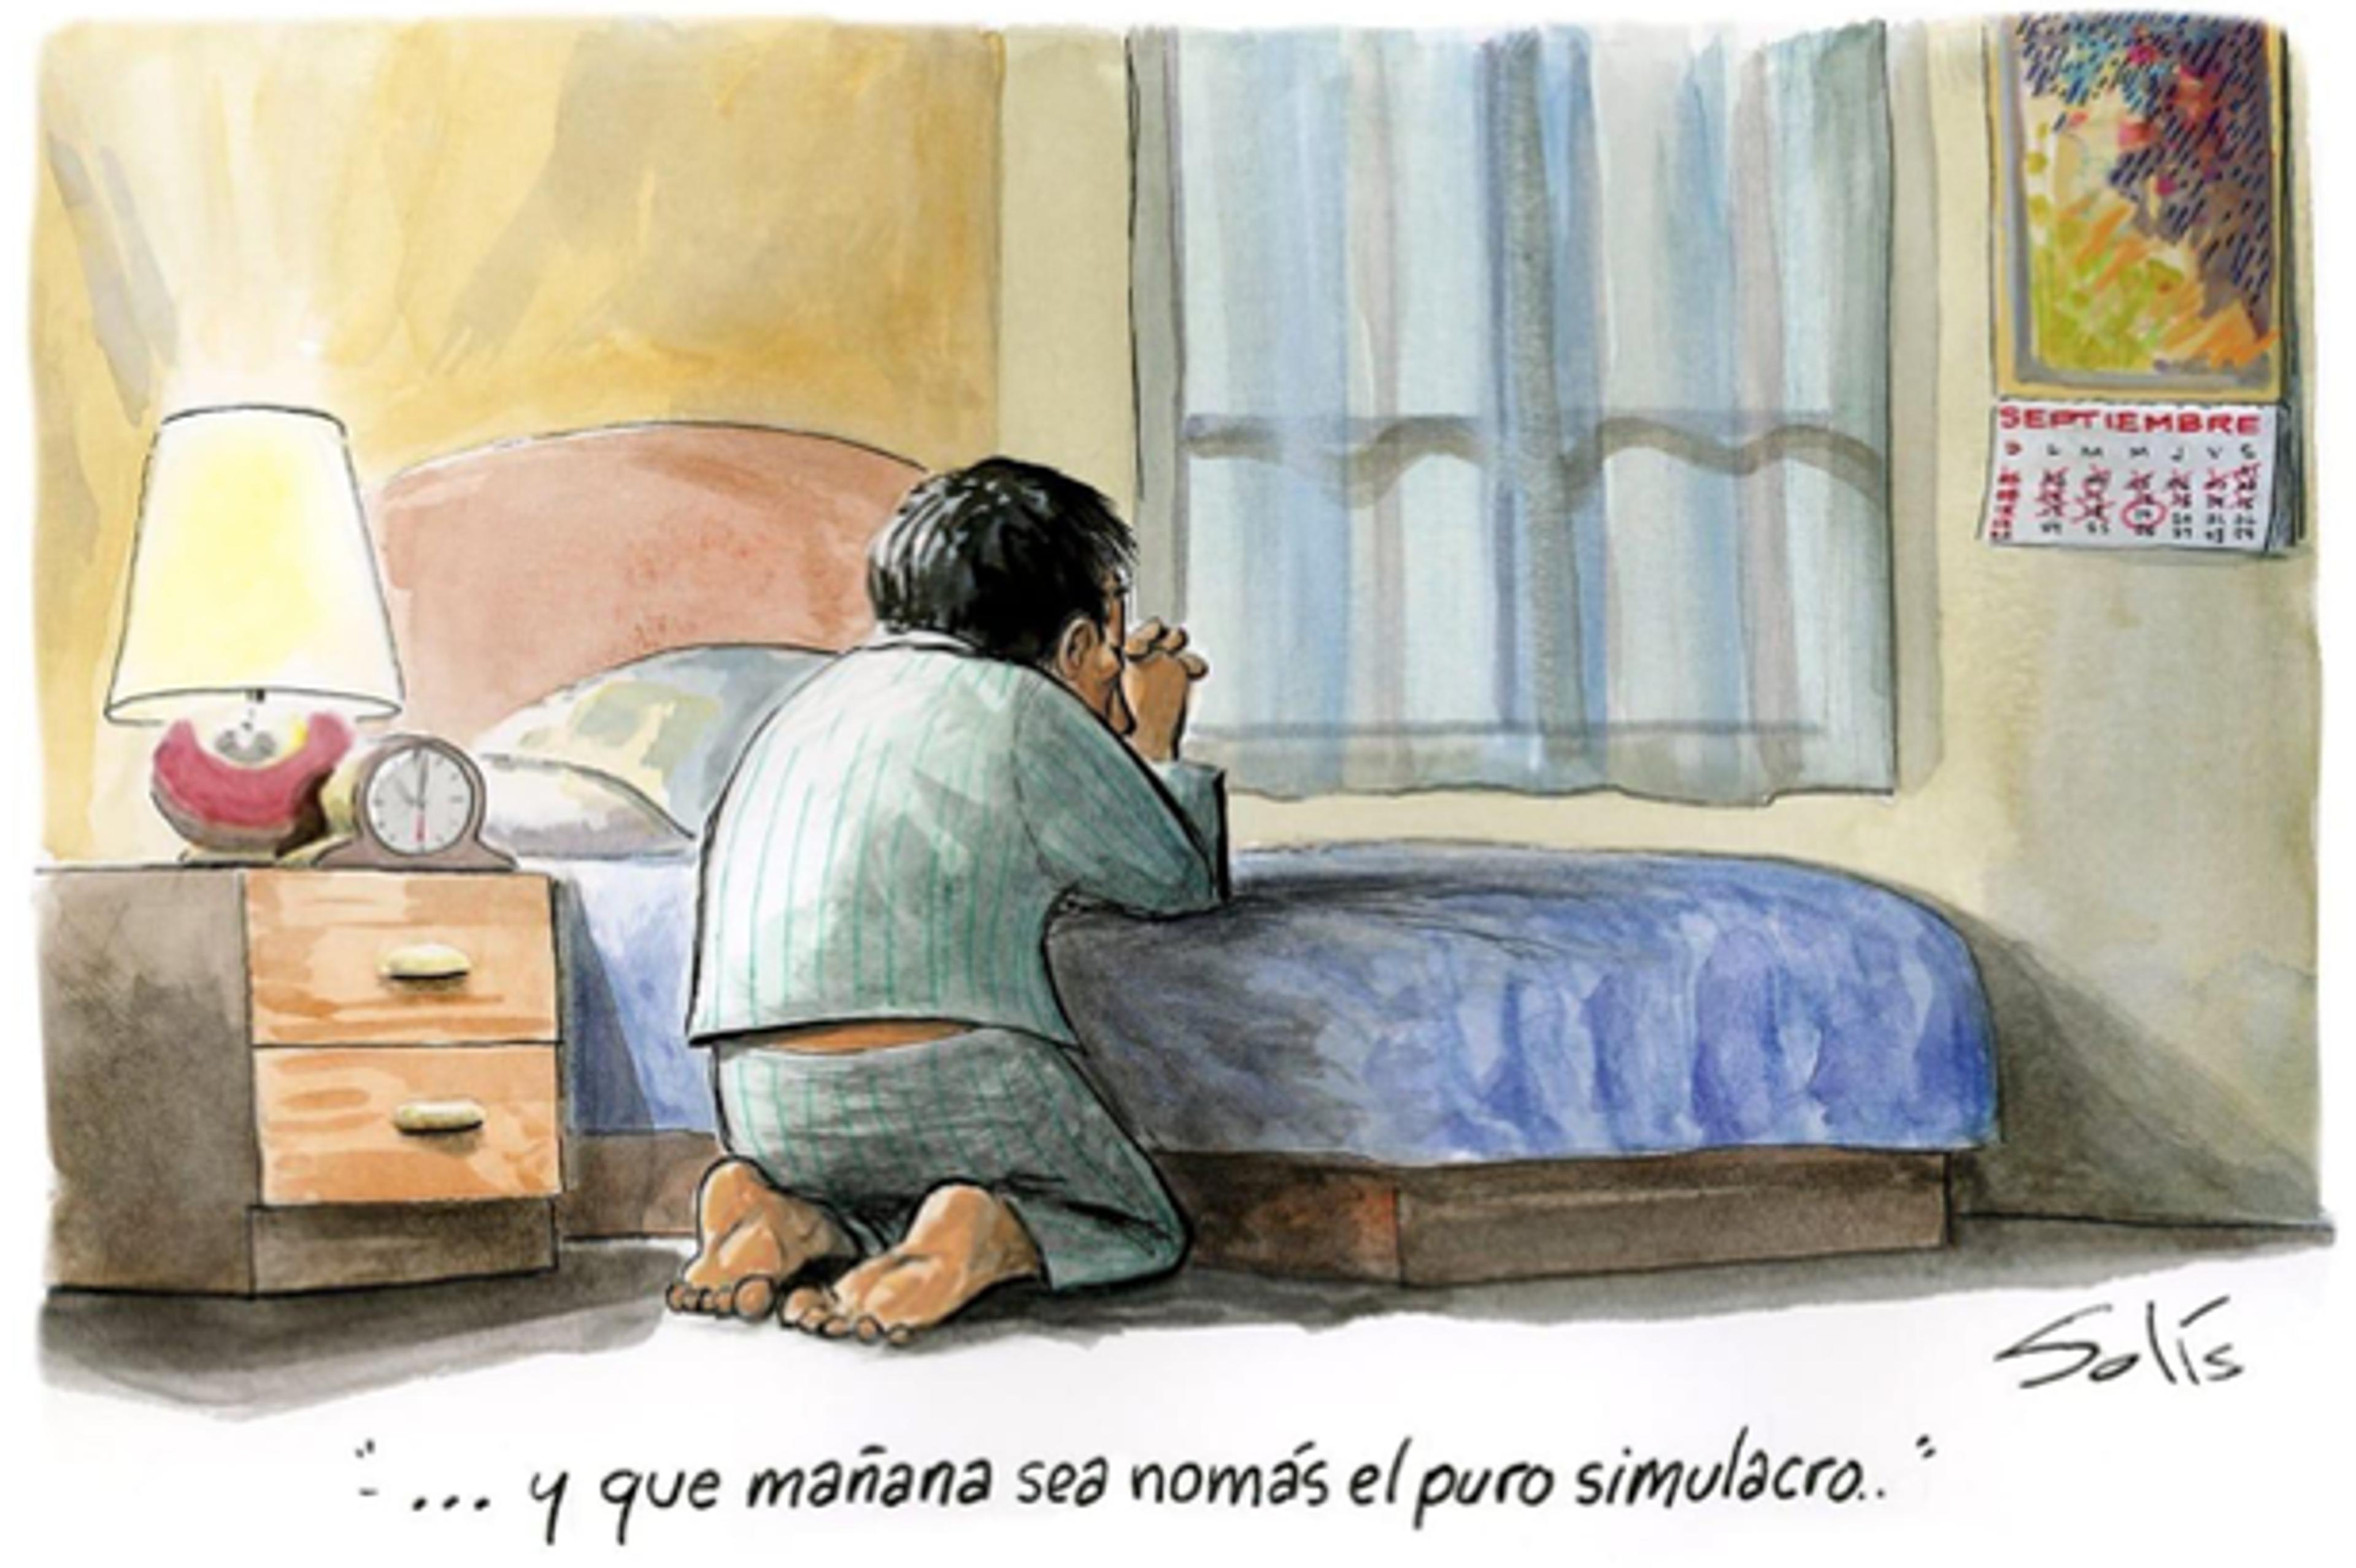 A cartoon depicts a man in his pyjamas praying beside his bed; a wall calendar displays the month of September